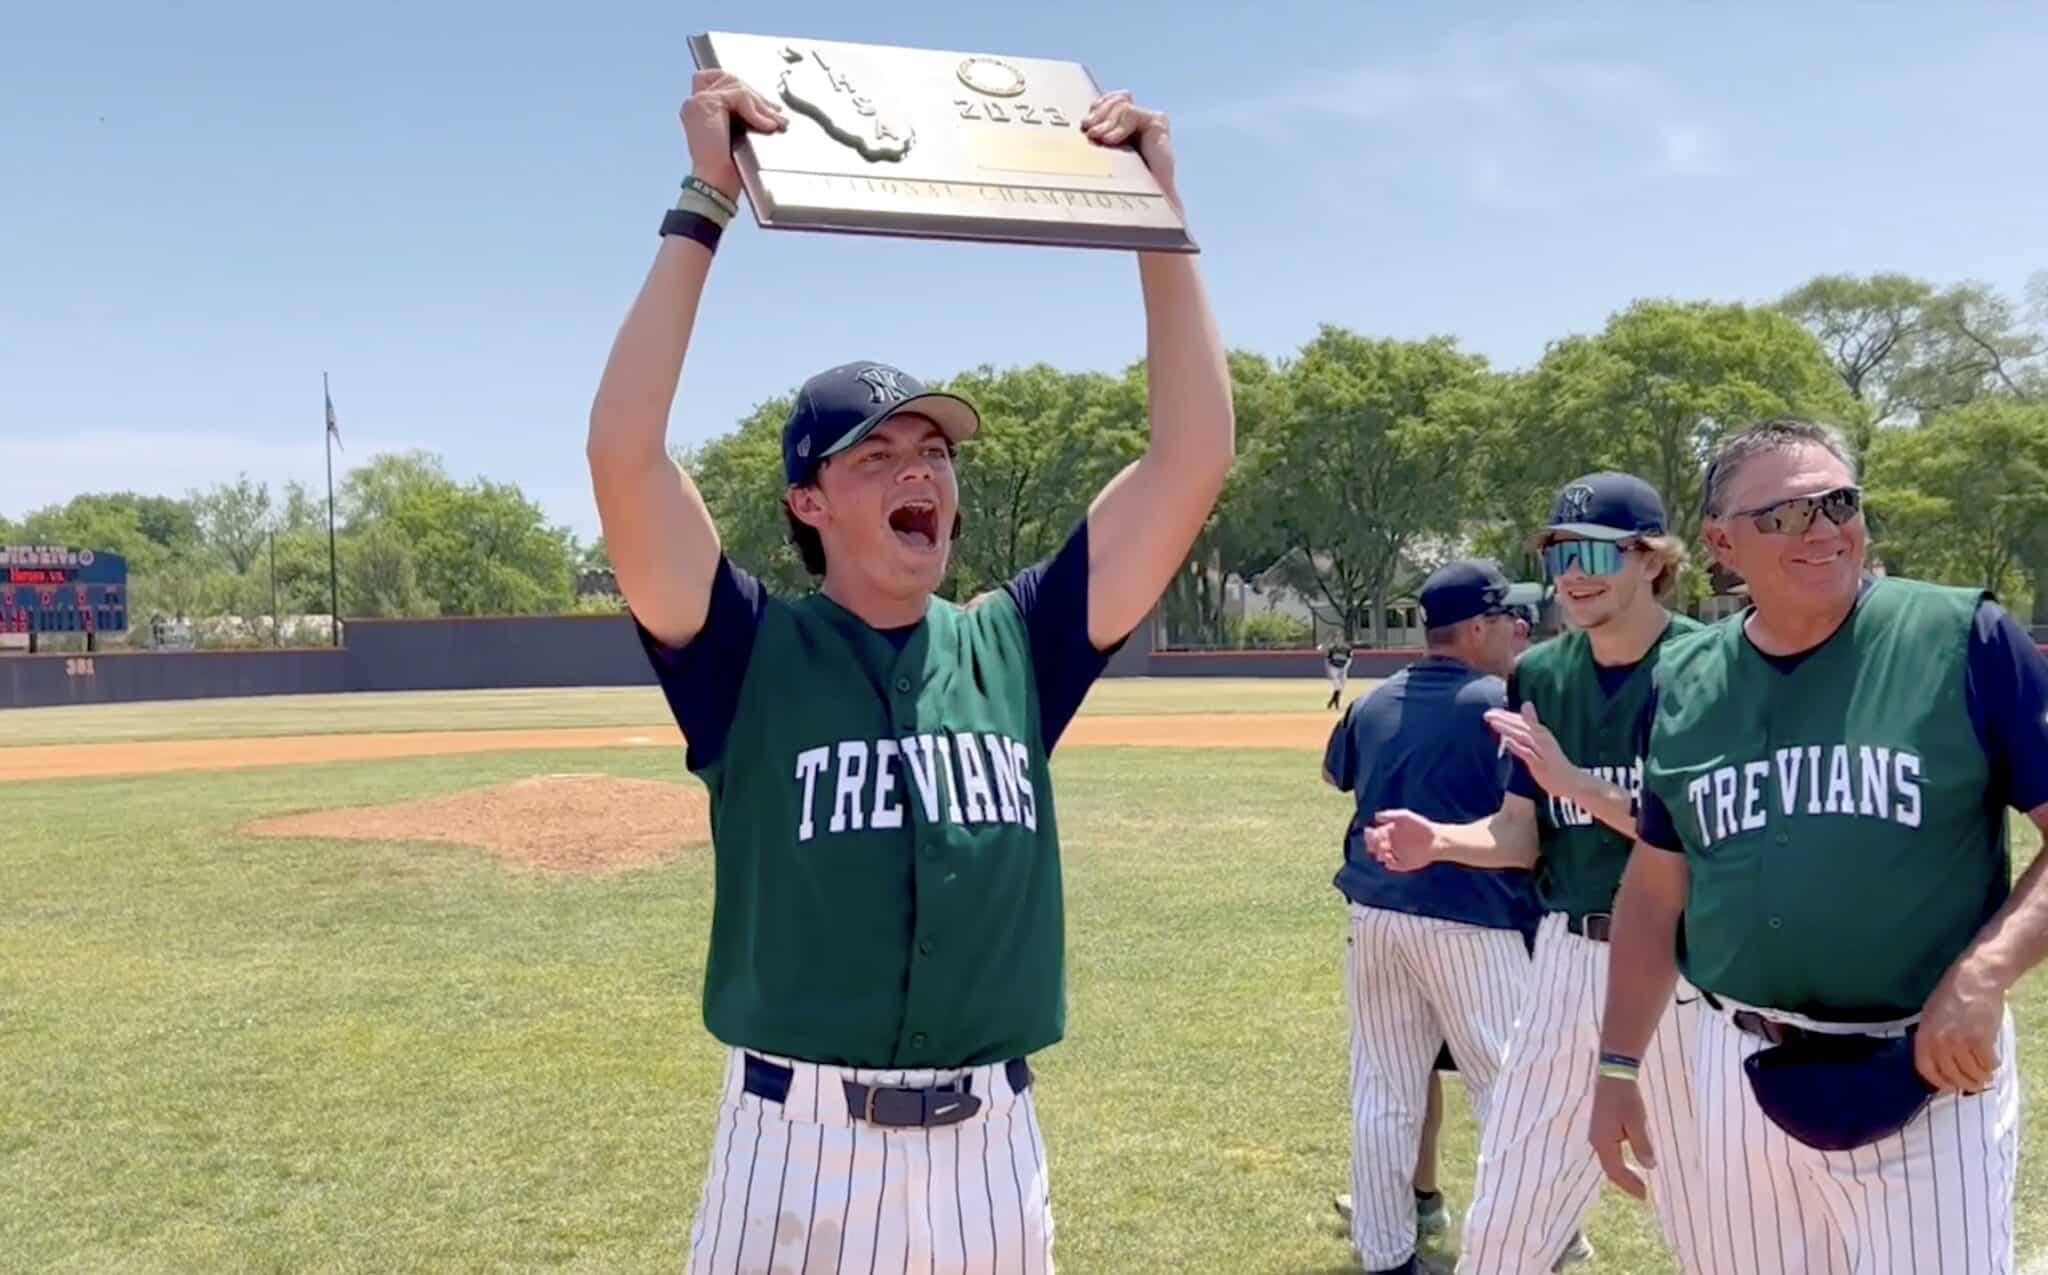 New Trier eyes state title for all-time wins coach Mike Napoleon